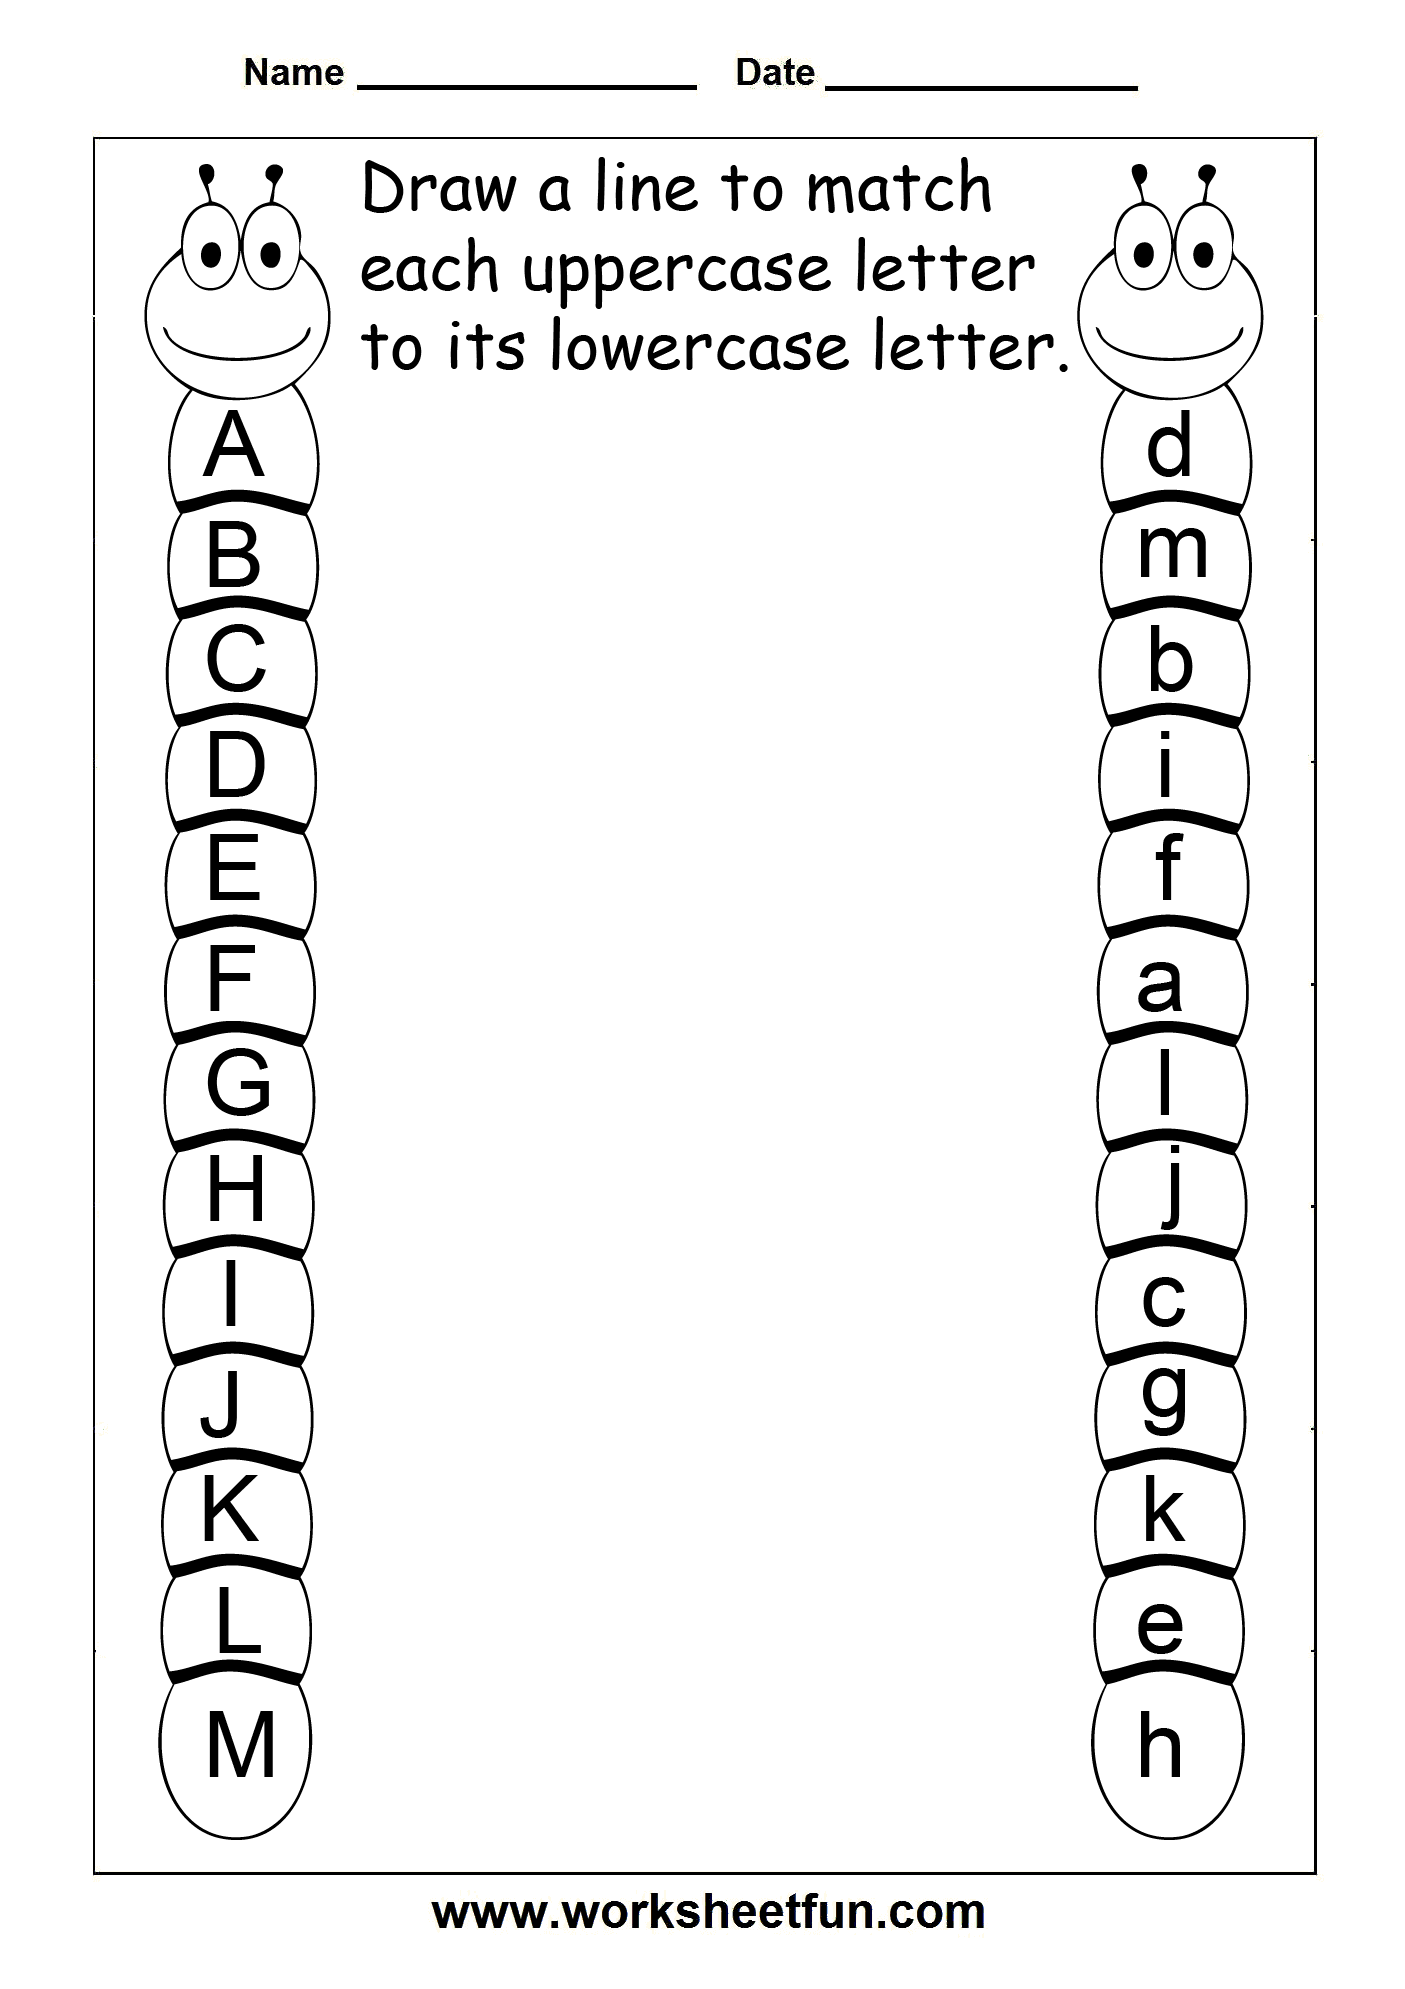 Match Uppercase And Lowercase Letters 11 Worksheets / FREE Printable